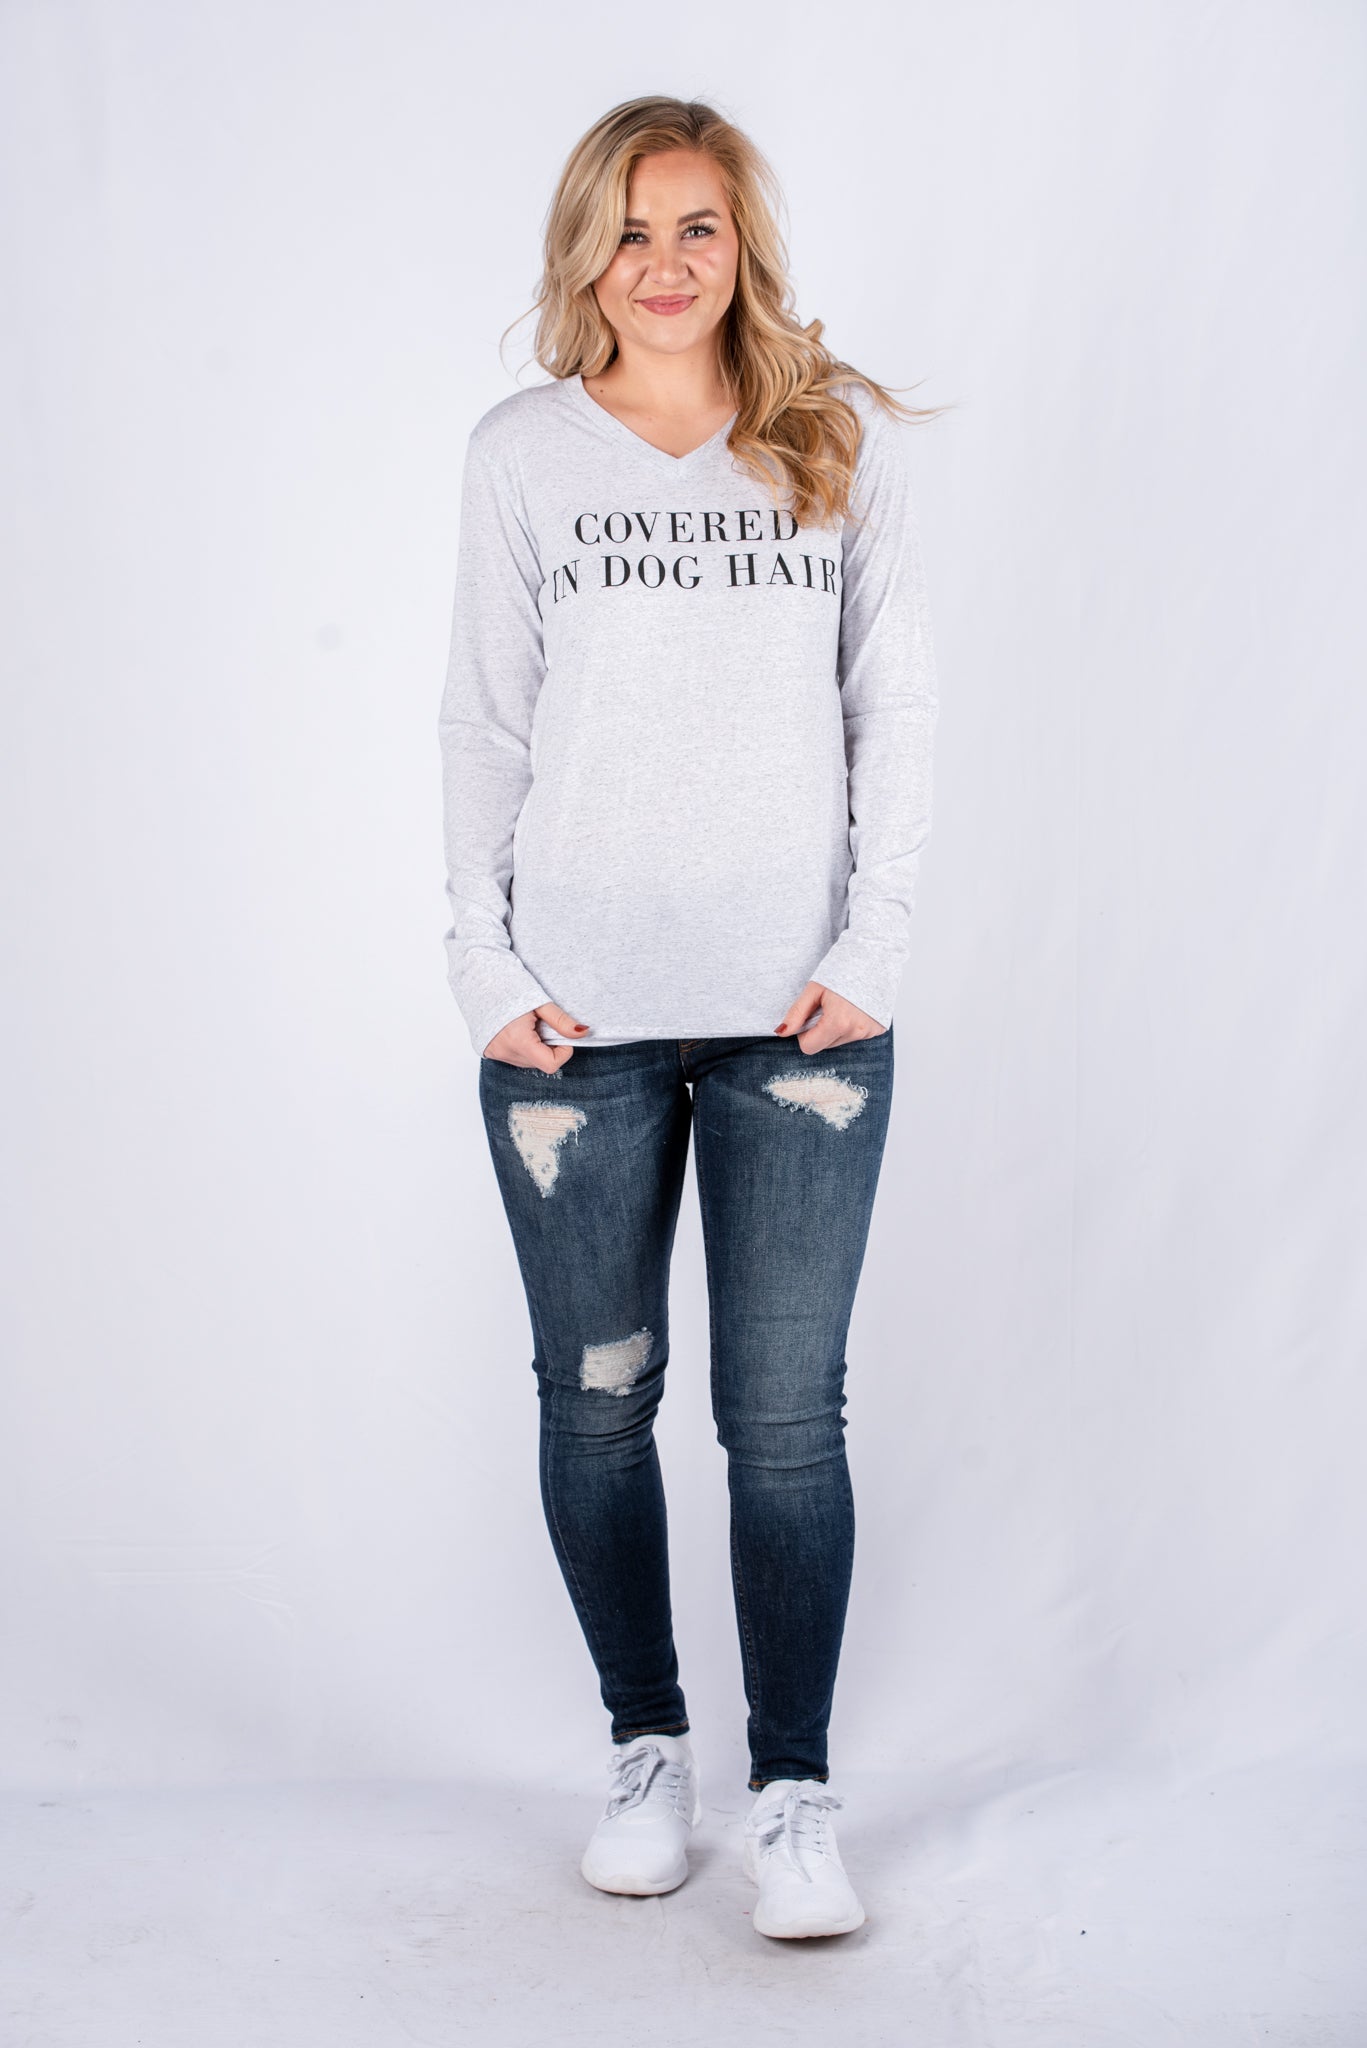 Covered in dog hair unisex long sleeve t-shirt white fleck - Trendy T-shirts - Cute Graphic Tee Fashion at Lush Fashion Lounge Boutique in Oklahoma